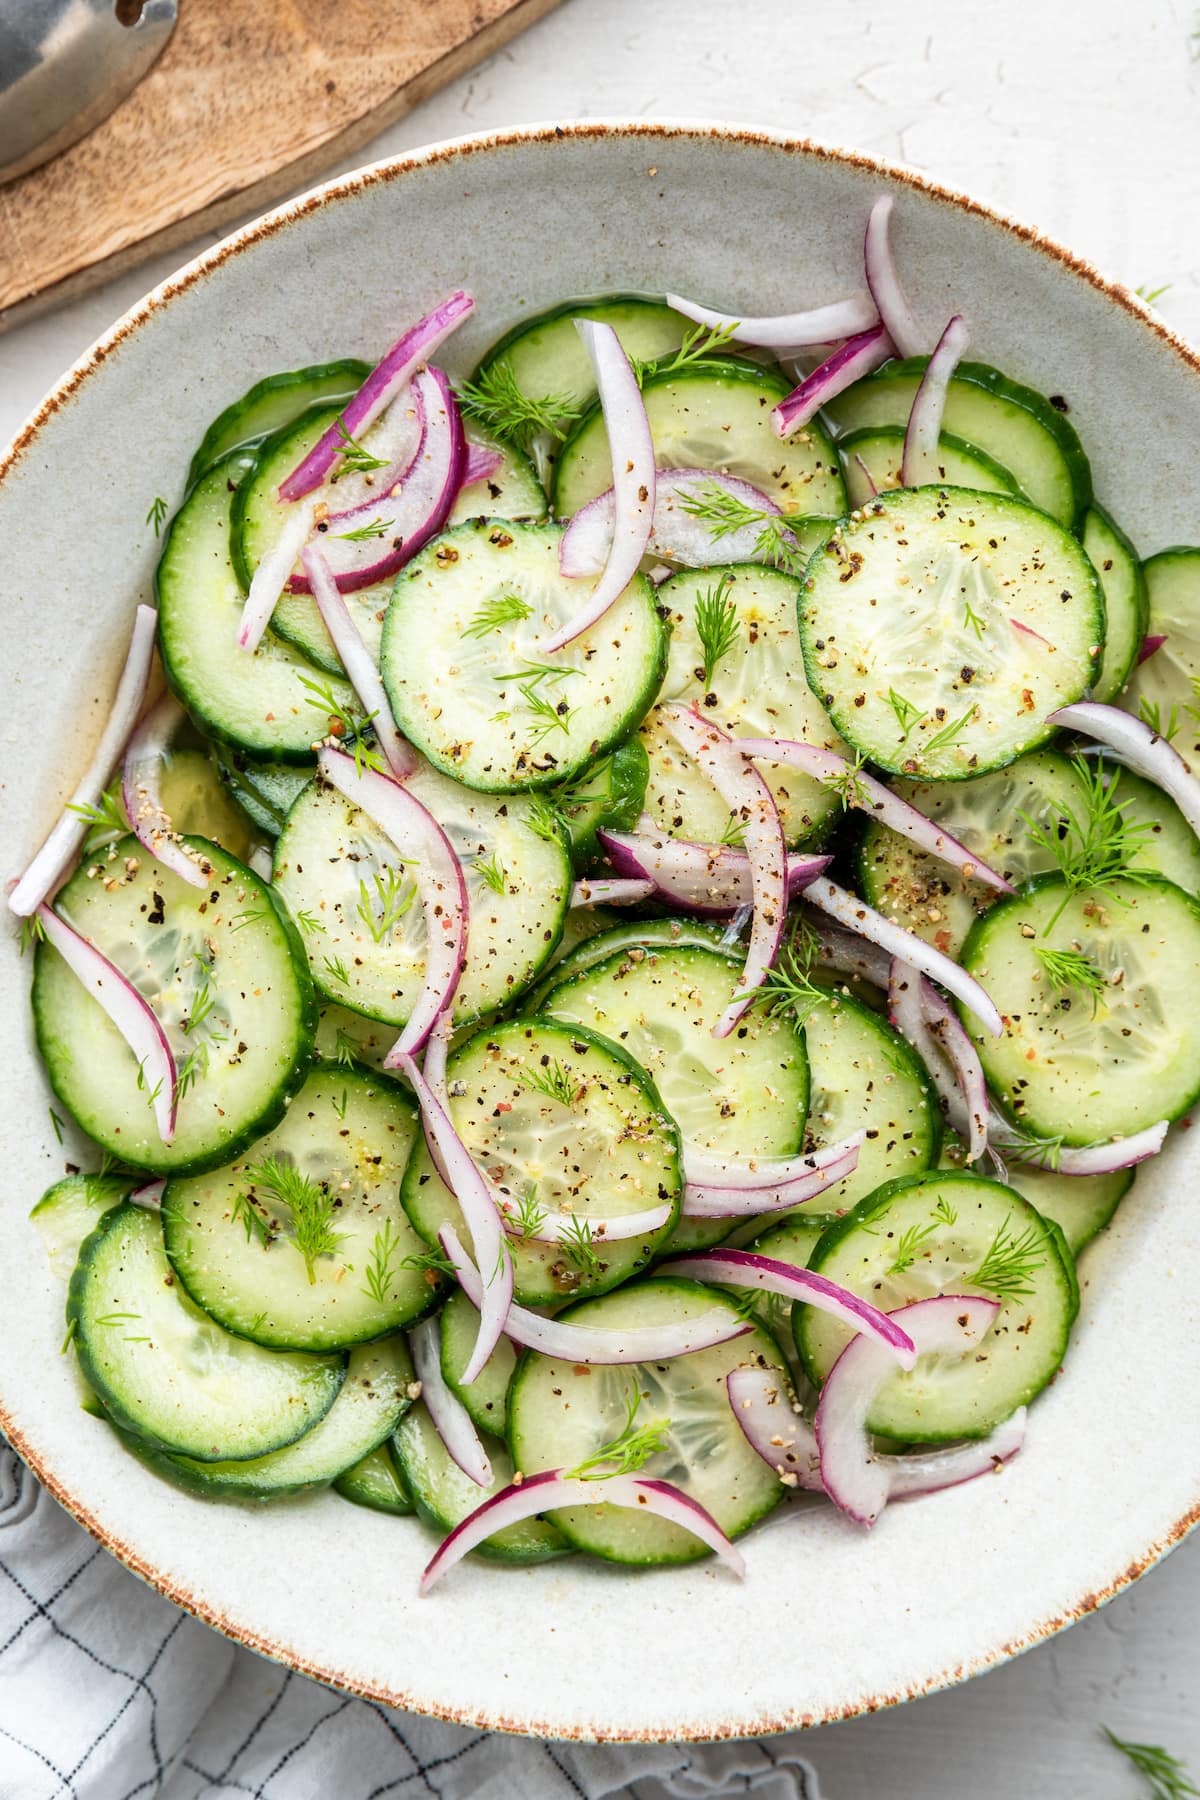 A cucumber salad in a white bowl with sliced cucumbers, red onion, and a vinaigrette.